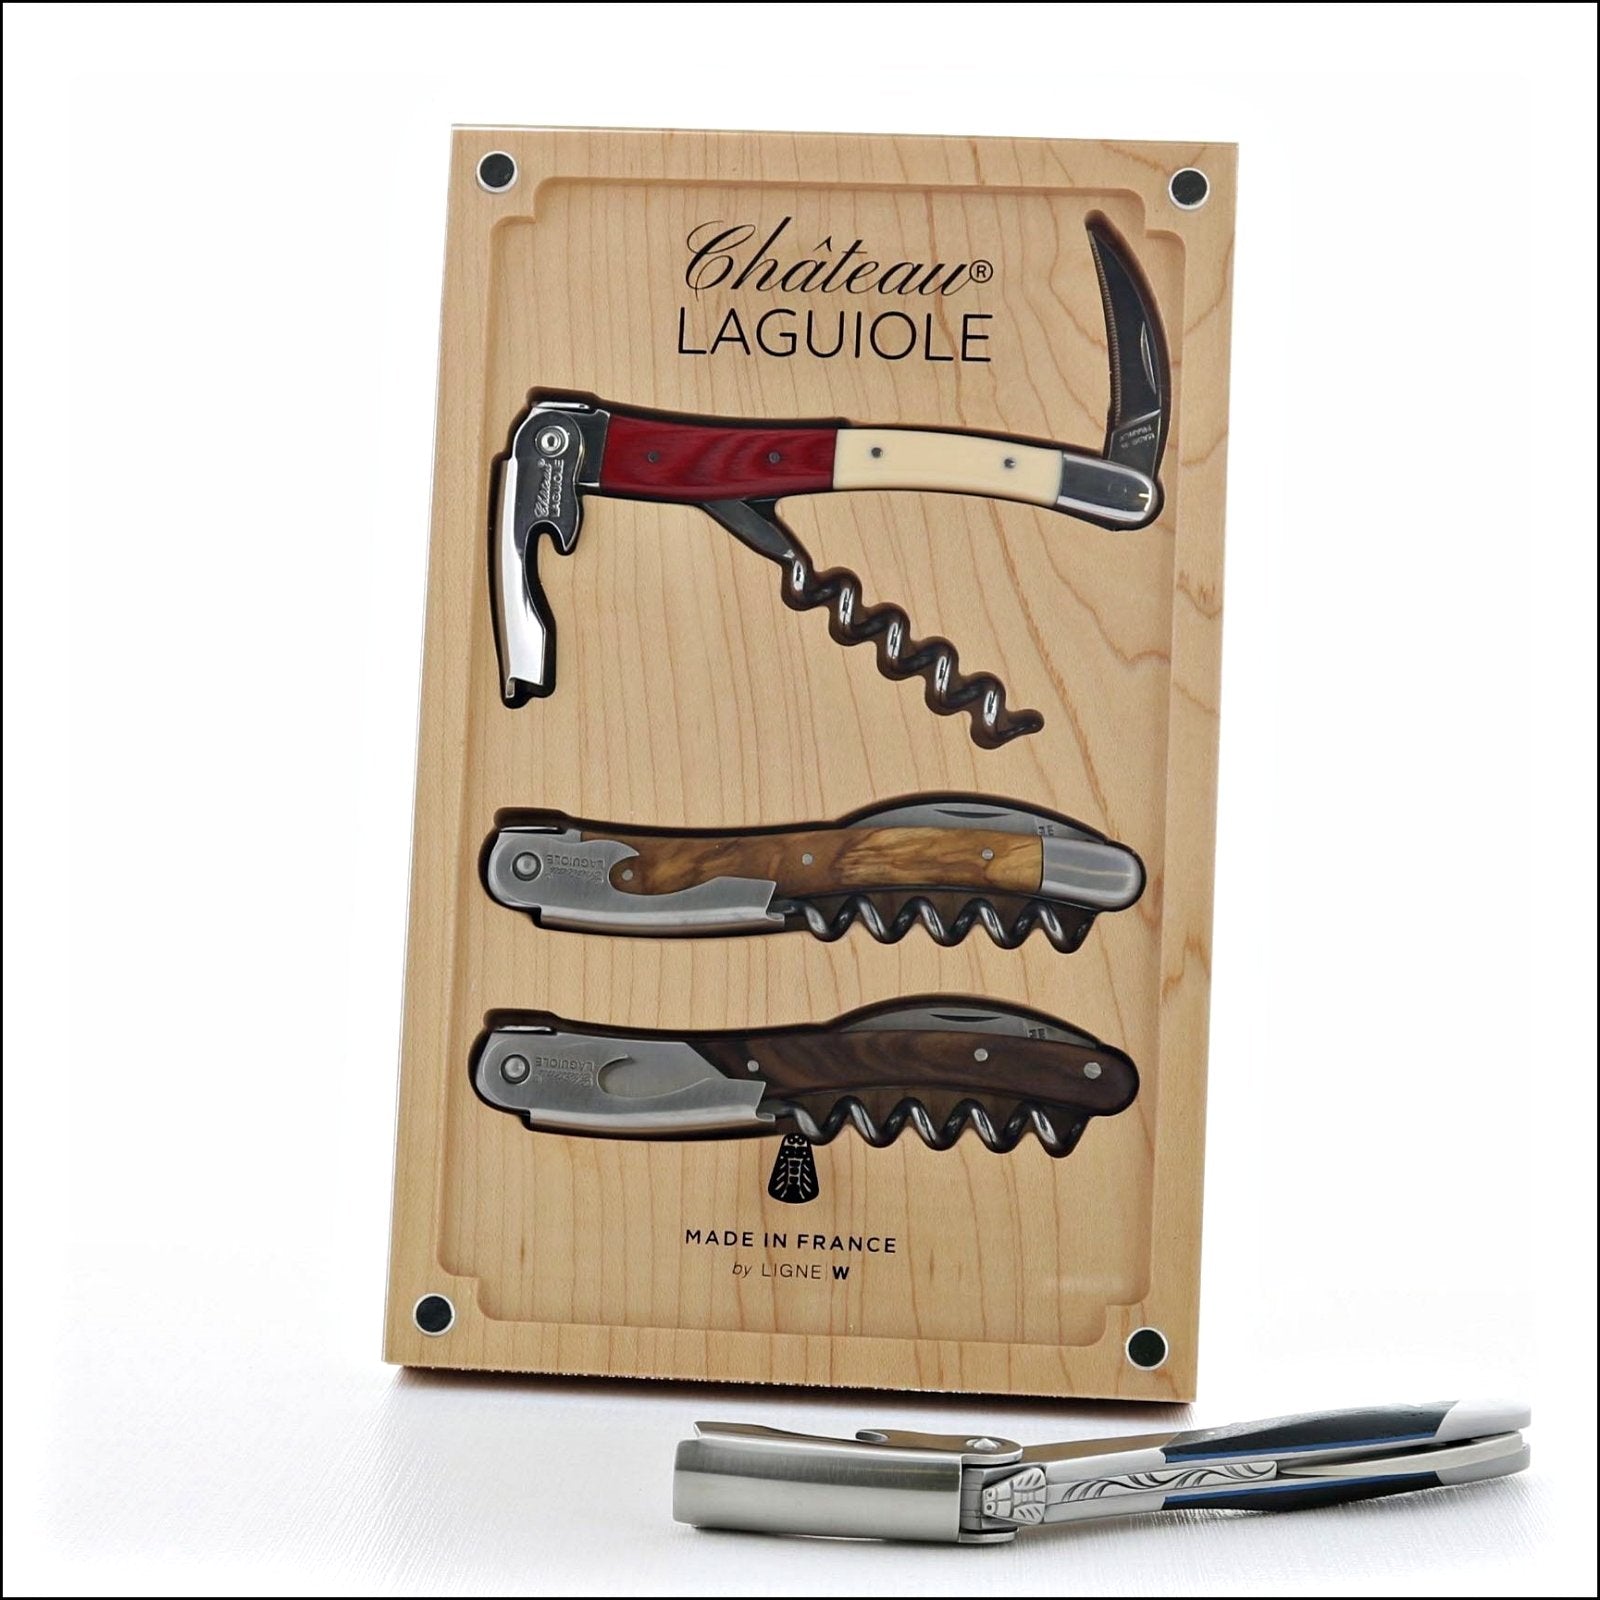 https://www.laguiole-imports.com/cdn/shop/products/Chateau-Laguiole-Display-3-Corkscrews-Chateau-Laguioler-Made-in-France.jpg?v=1635849054